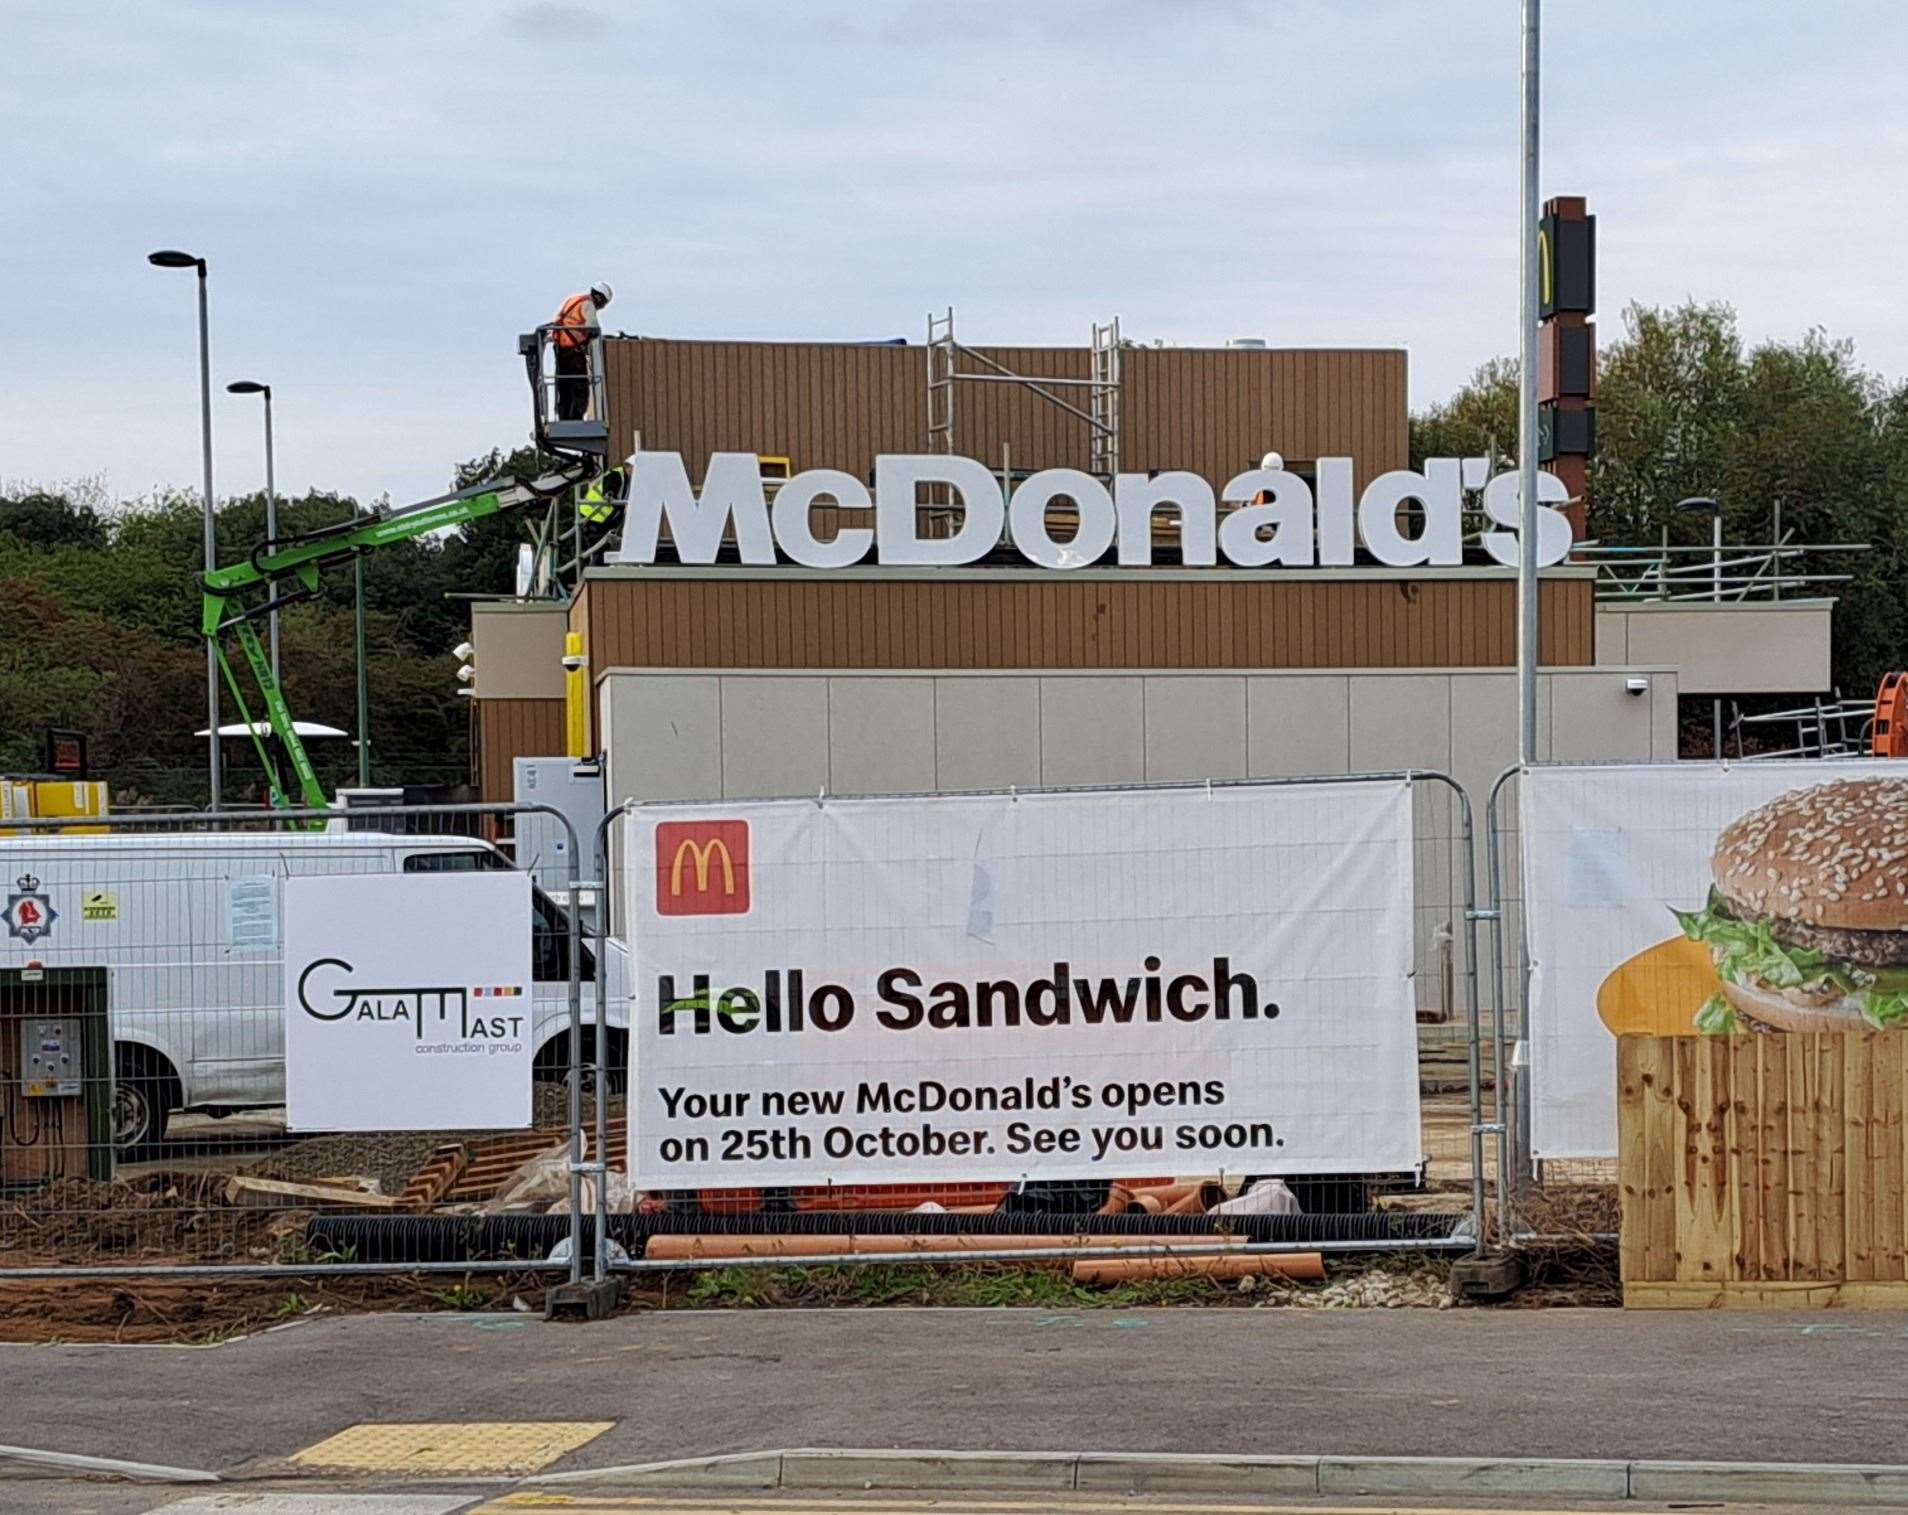 The new McDonald's restaurant is taking shape and has just been granted permission to stay open 24 hours a day